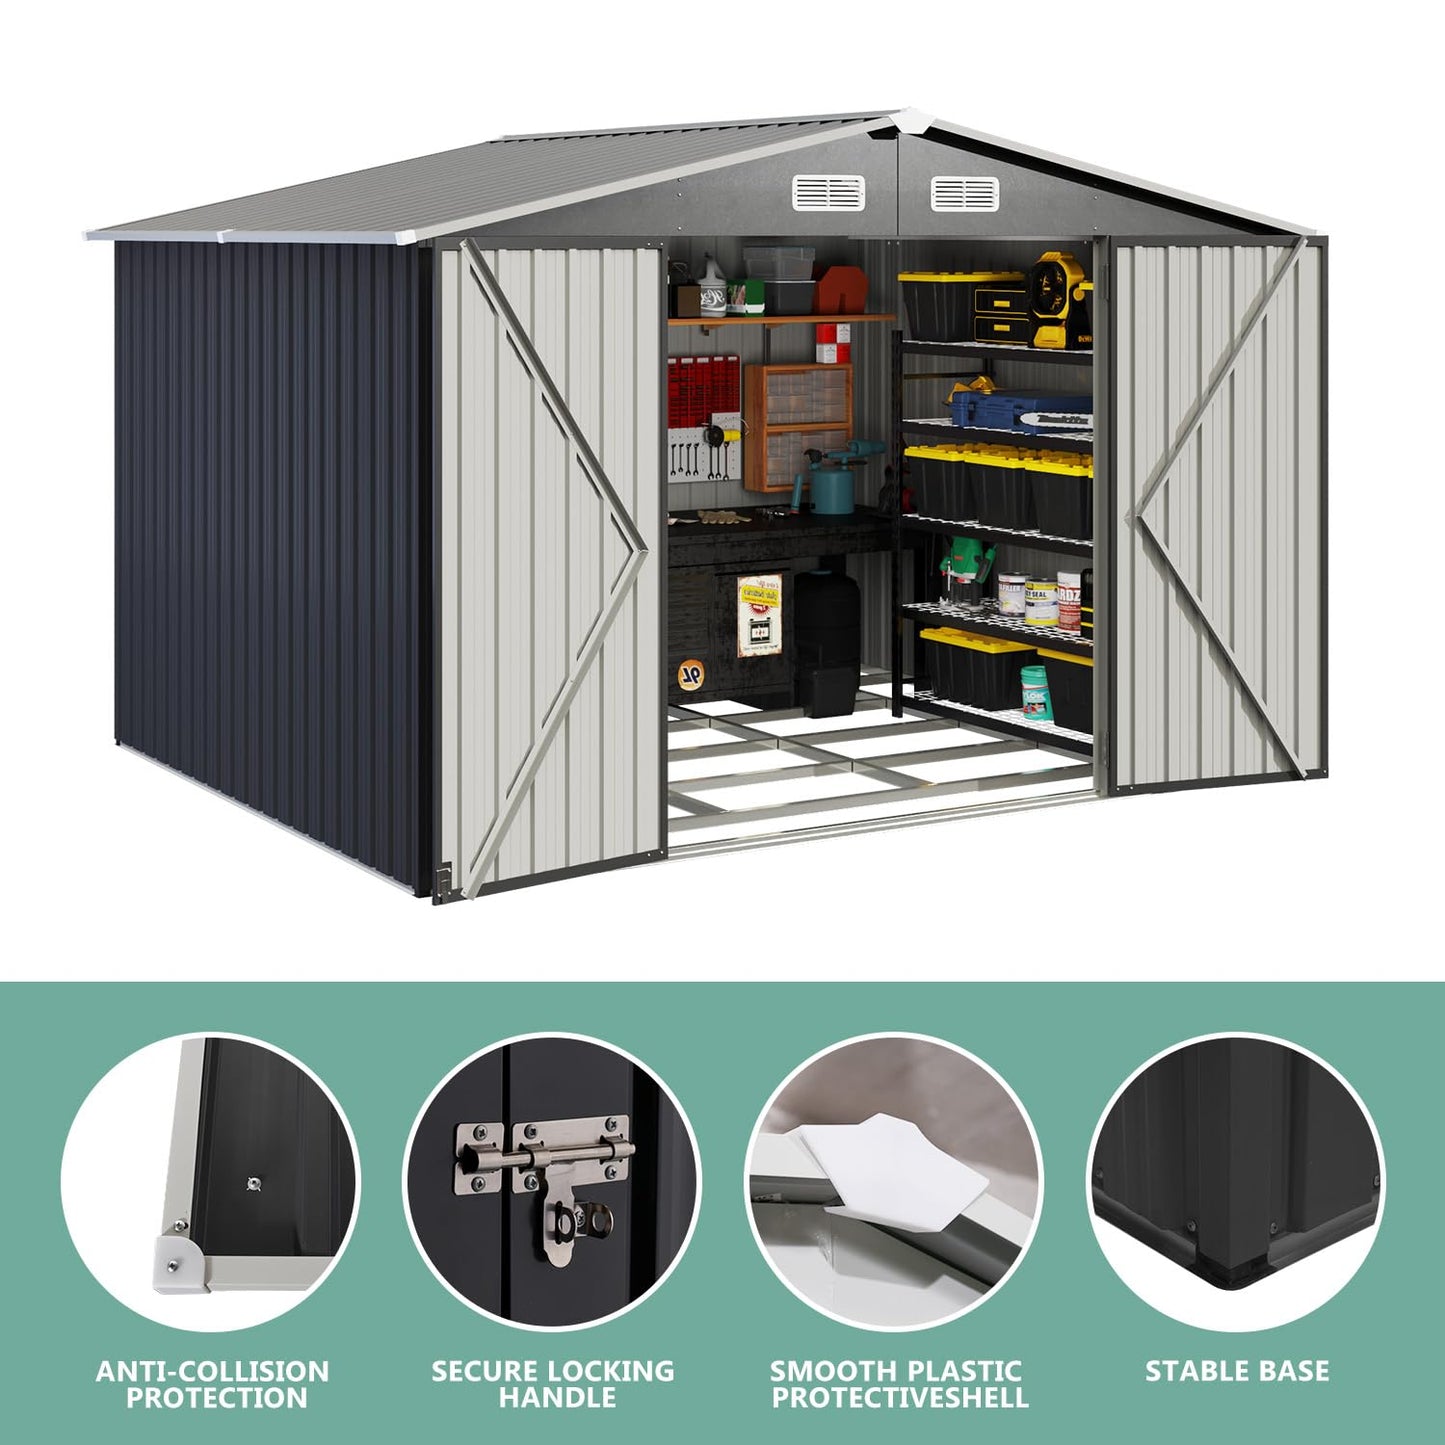 Aoxun 9.6’x7.8’ Outdoor Metal Storage Shed, Steel Utility Tool Shed Storage with Lockable Doors, Metal Sheds Outdoor Storage for Garden, Backyard, Lawn and Patio, Black